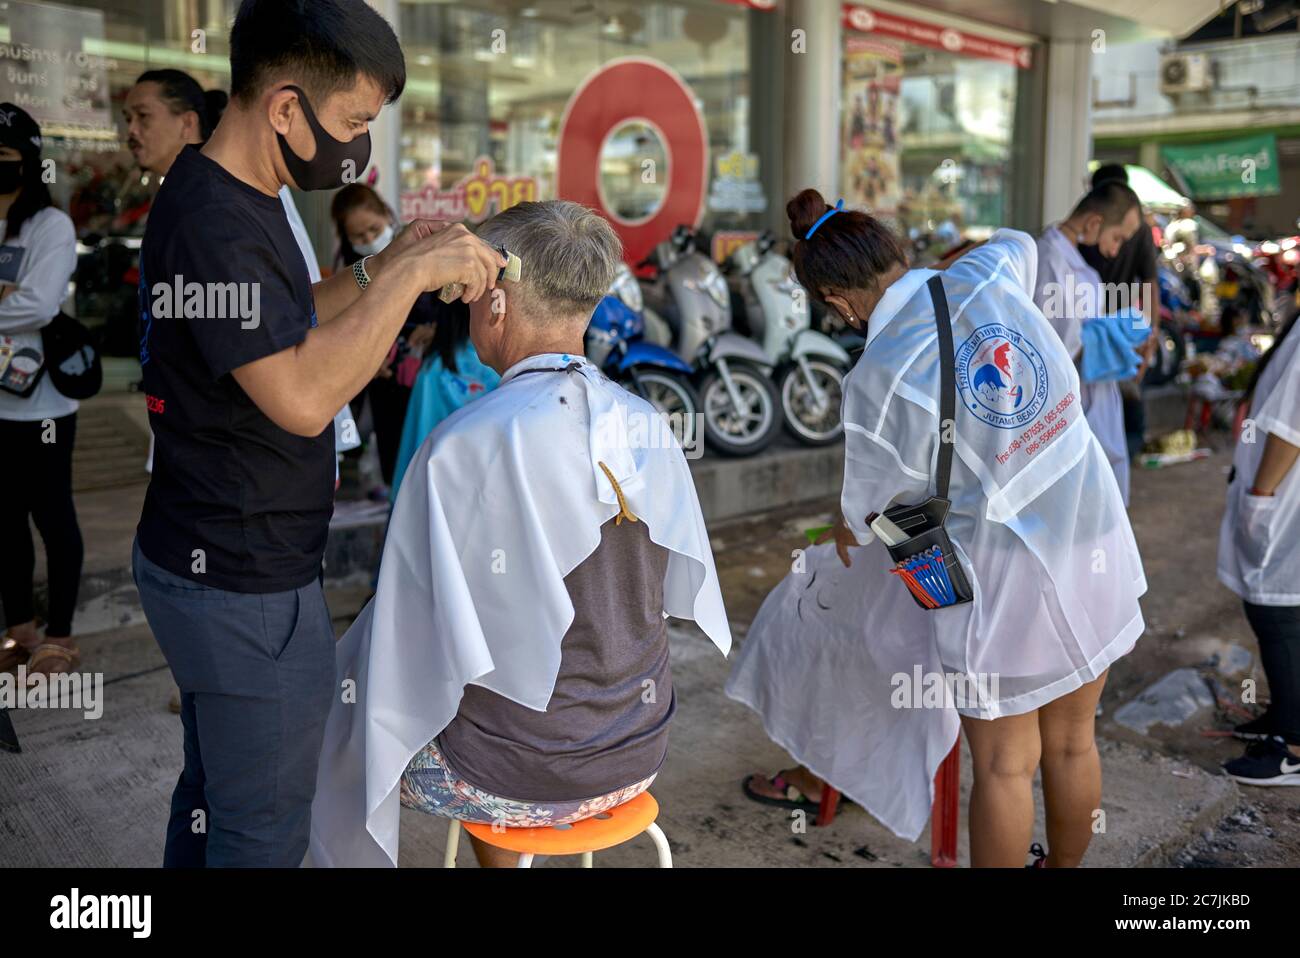 Street haircut. Business promotion of a local Thailand hair salon with people getting a free haircut outside on the pavement sidewalk Stock Photo